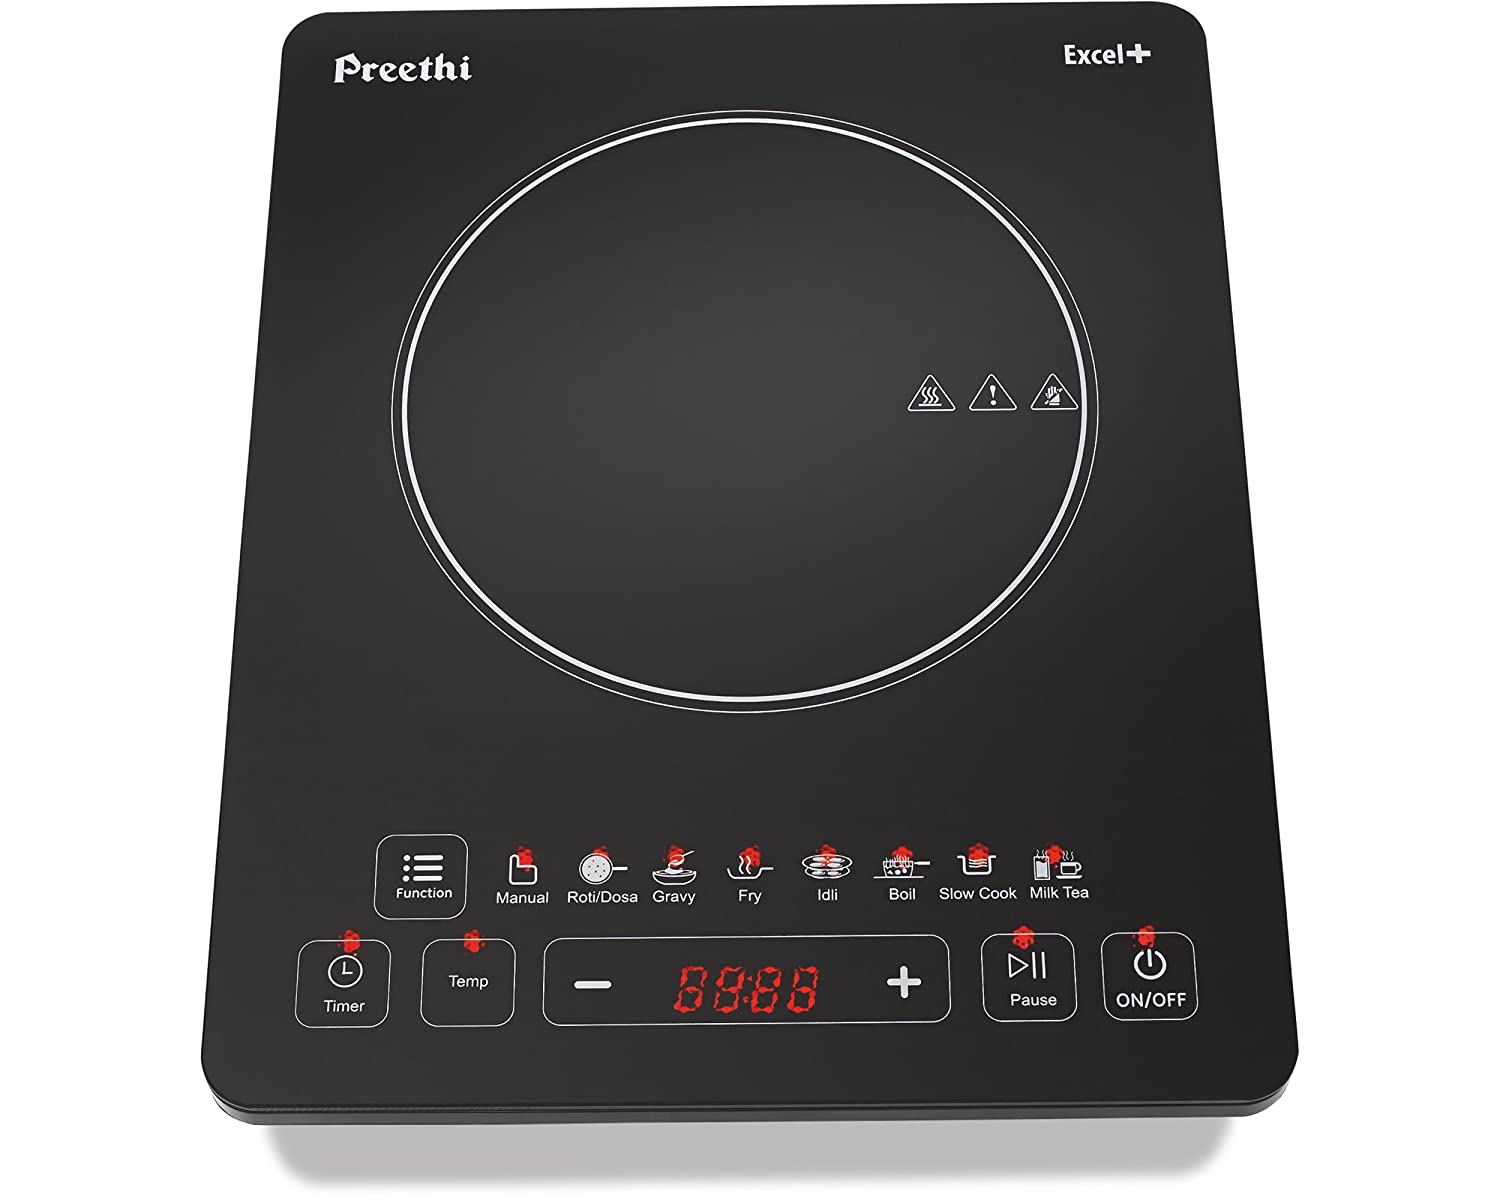 PREETHI INDUCTION COOKTOP EXCEL+